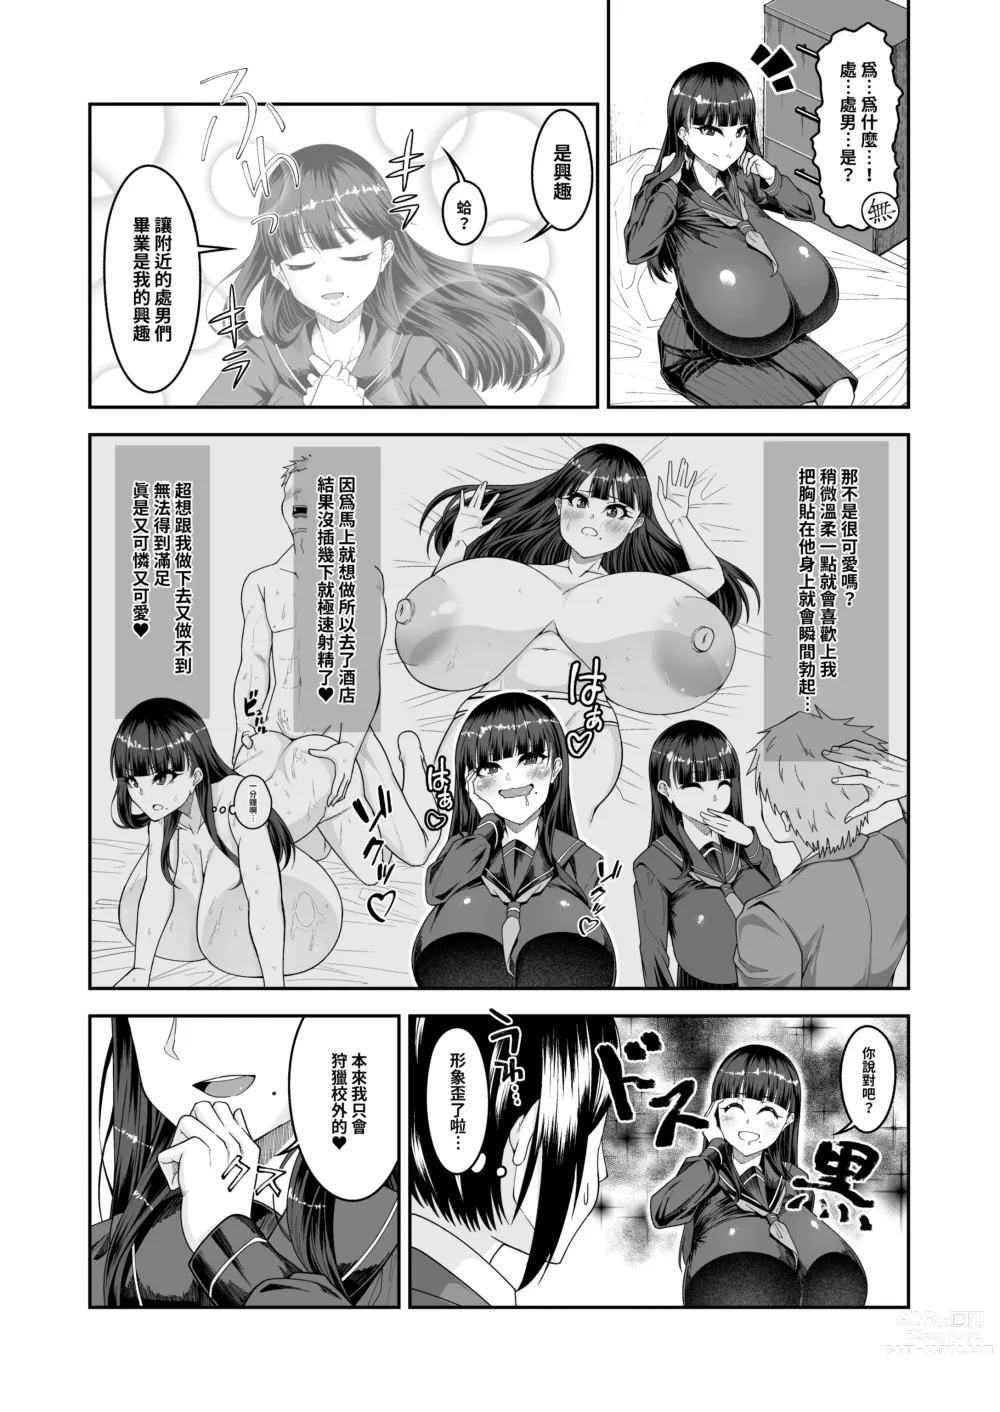 Page 8 of doujinshi 白肉的軟棉與黑肉的軟彈